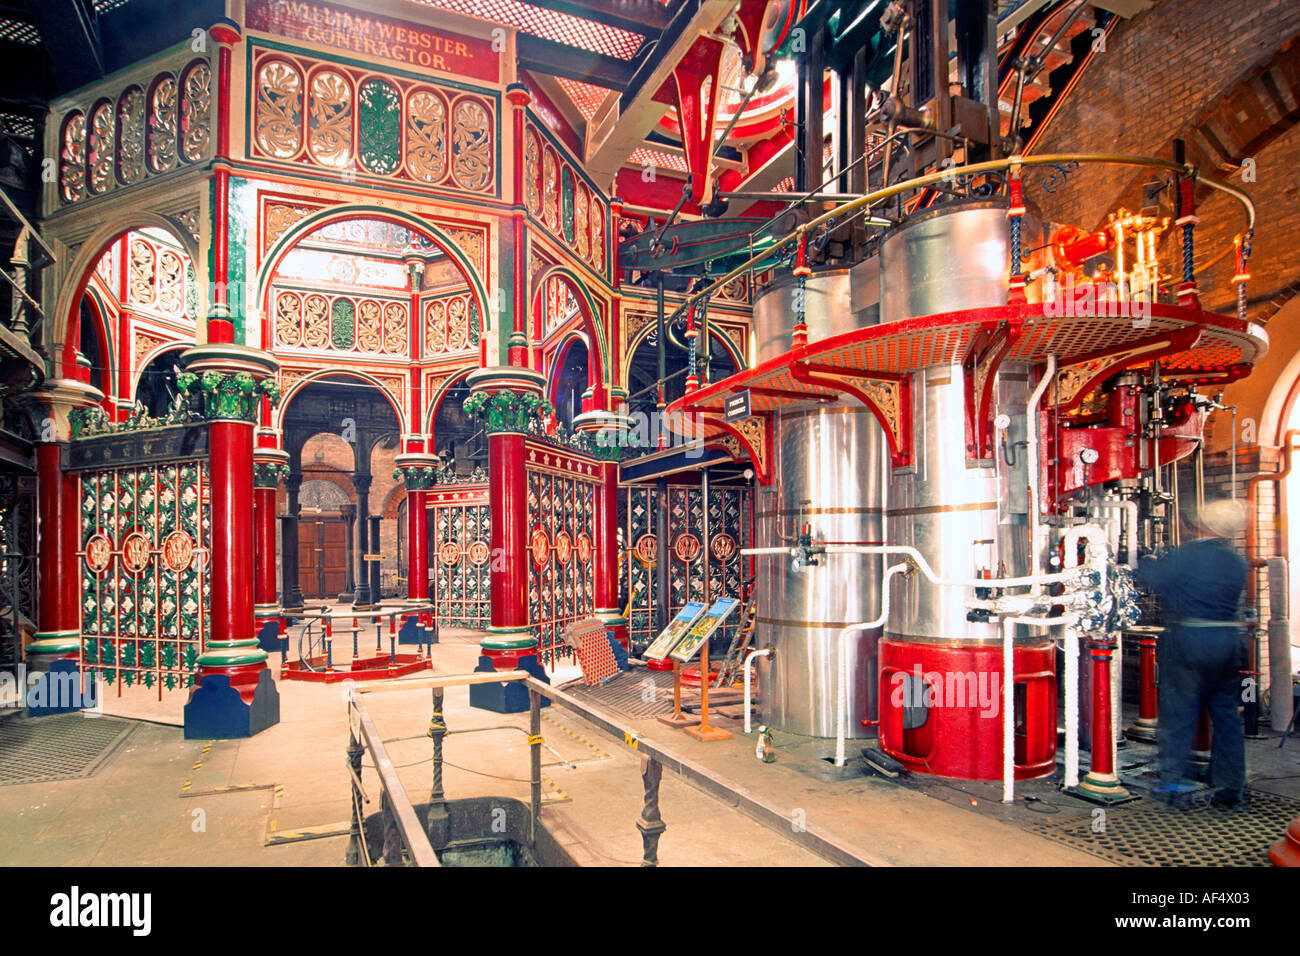 The restored, ornate interior of the Victorian-era Crossness Pumping station in east London. Stock Photo